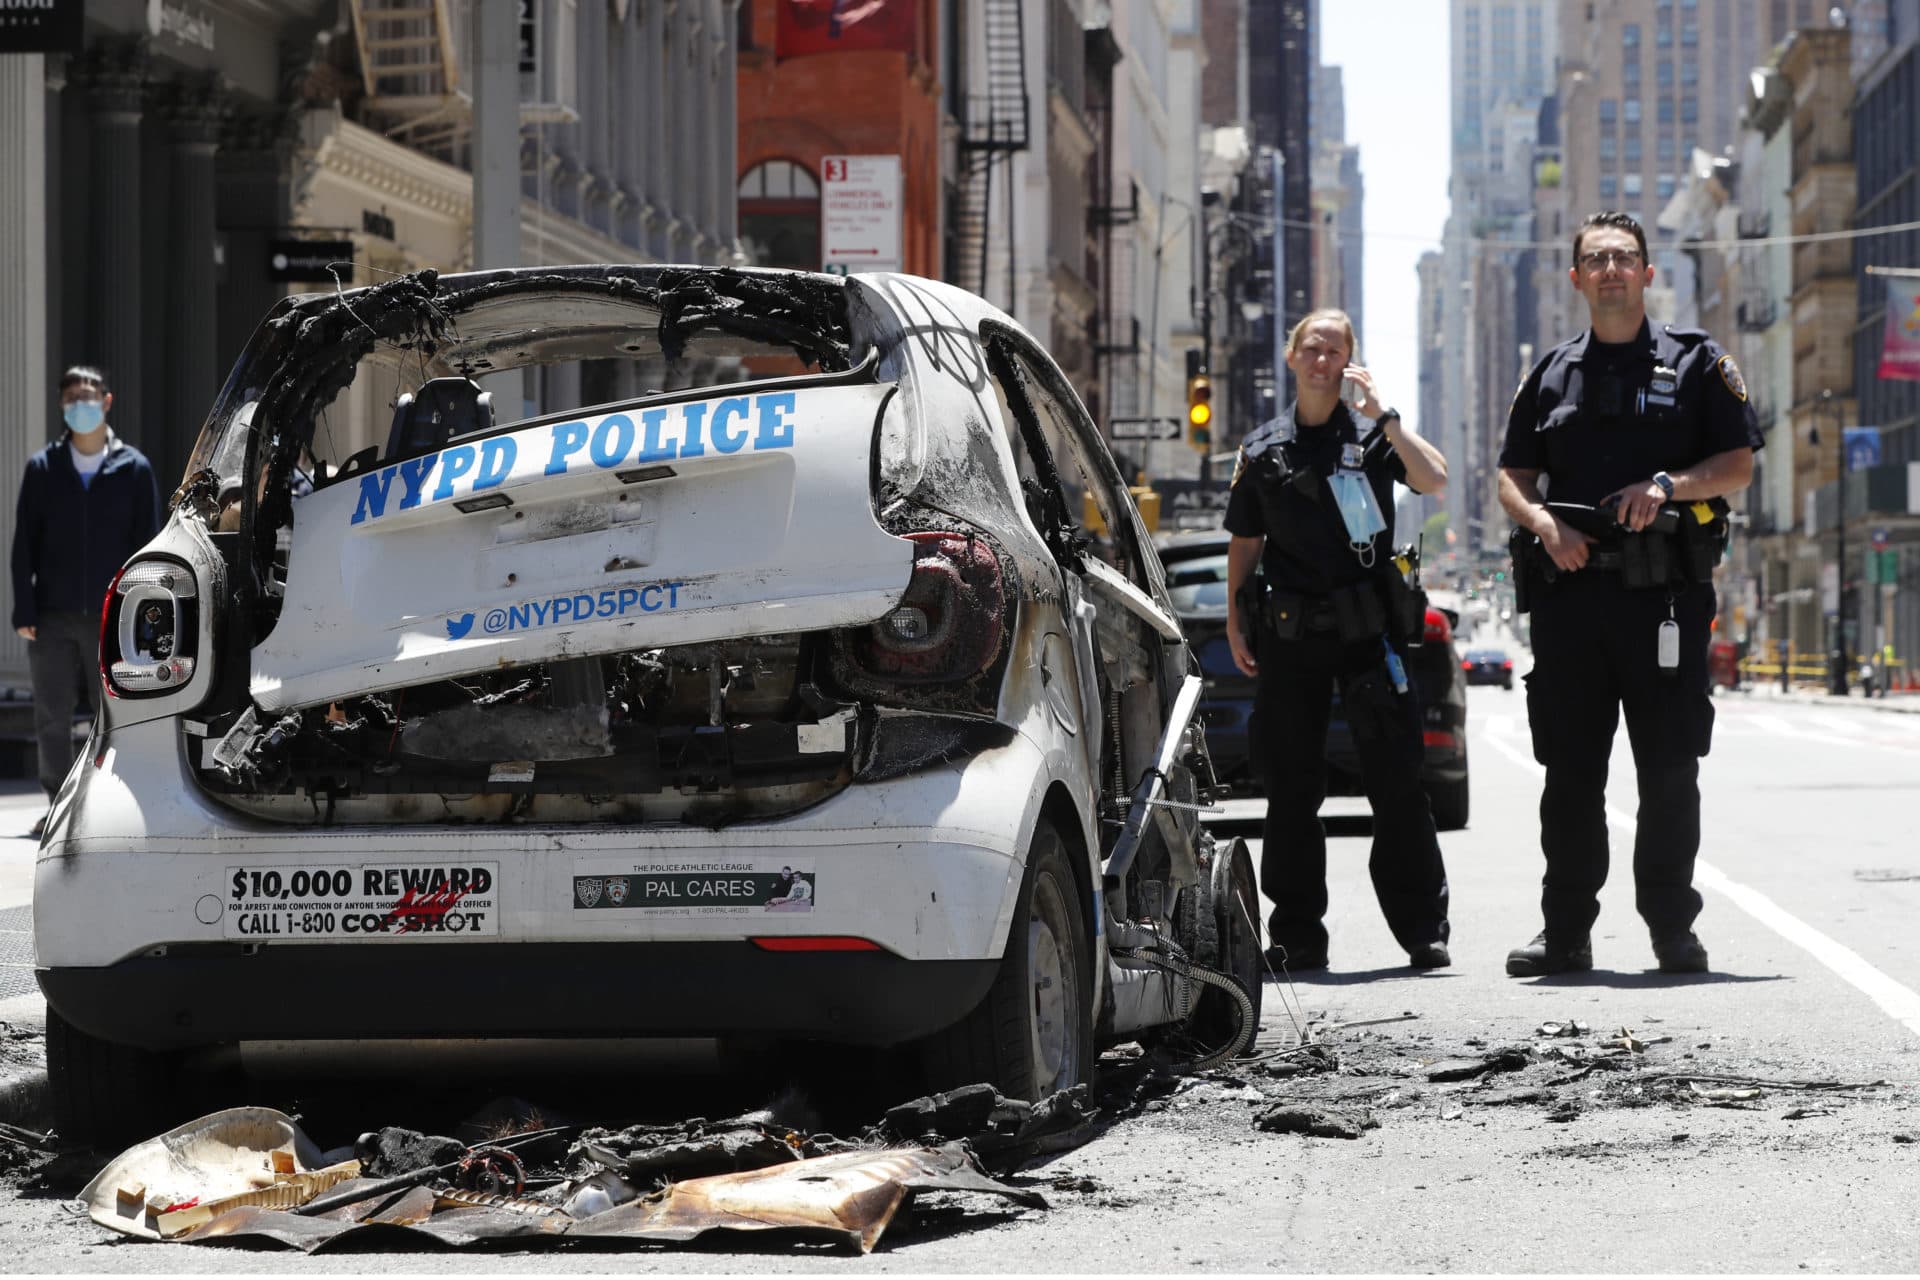 Officers stand guard beside a burned-out mini-New York Police Department vehicle, abandoned on Broadway in Lower Manhattan, Sunday, May 31, 2020, in New York. (AP Photo/Kathy Willens)